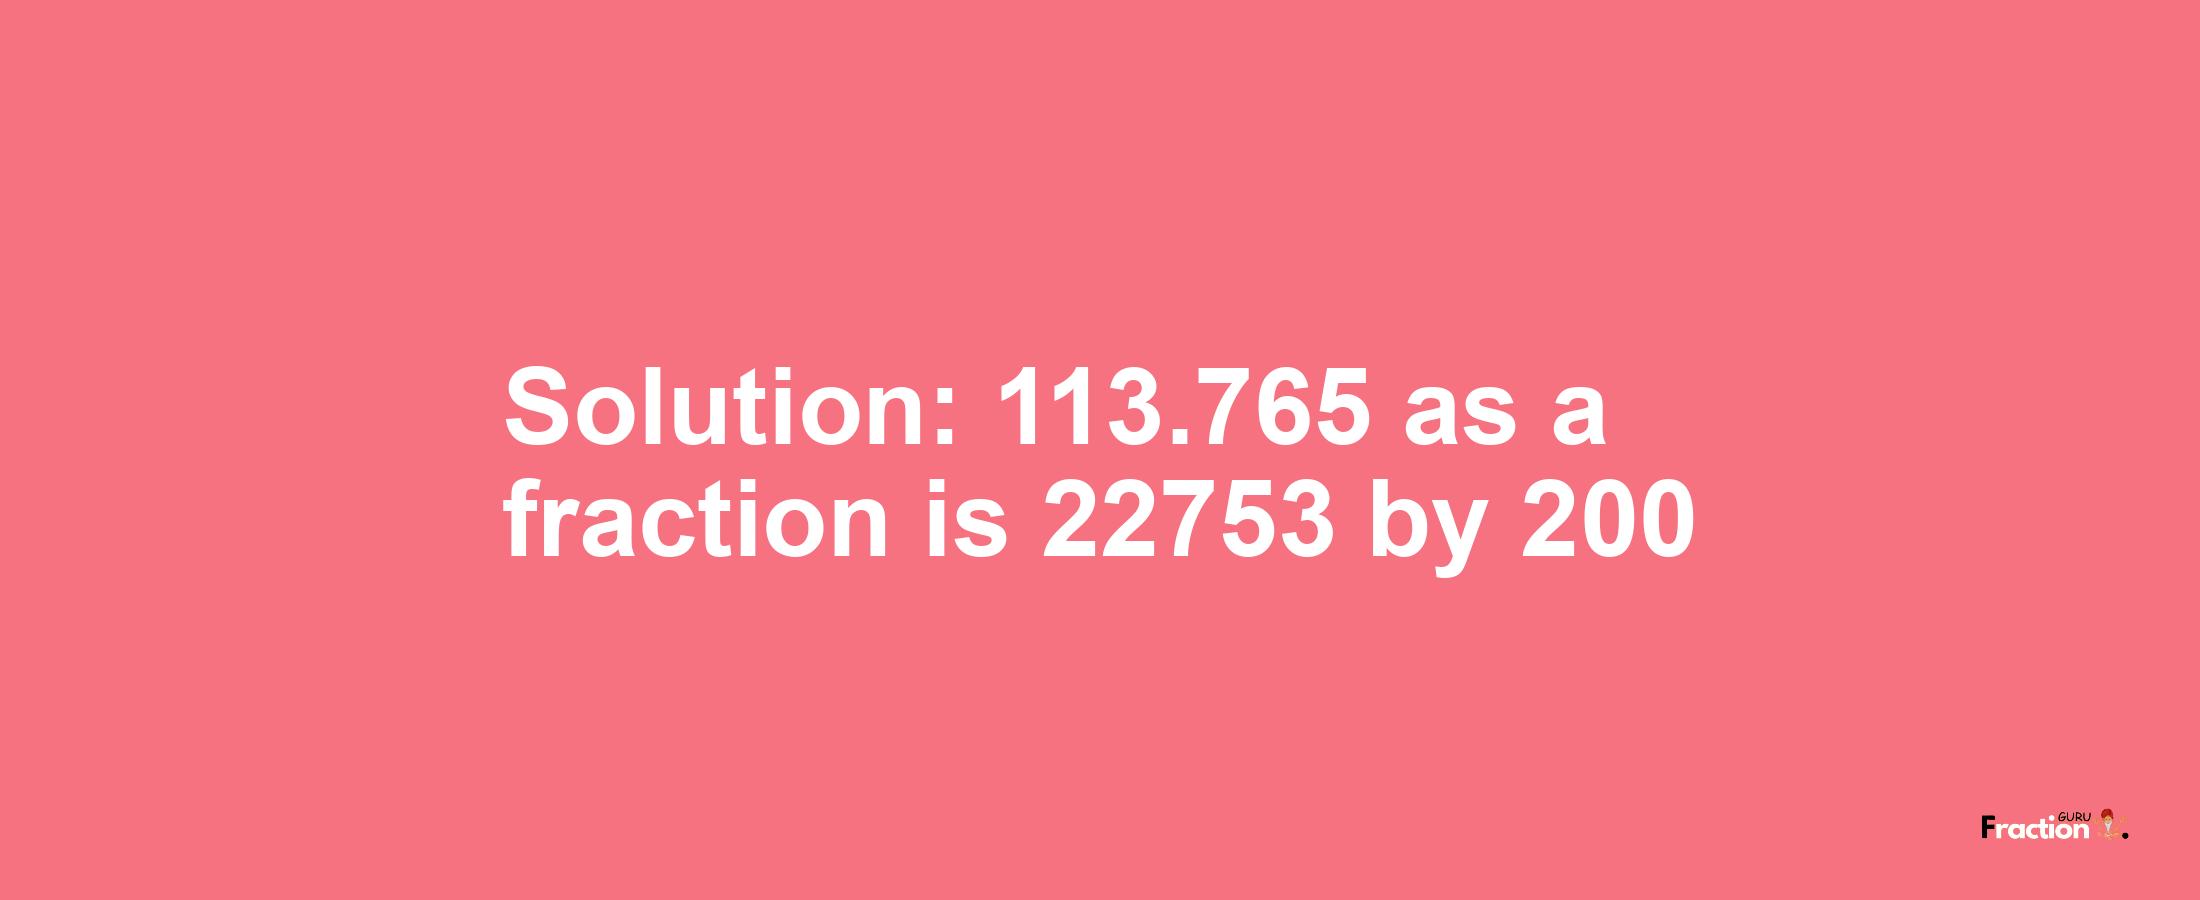 Solution:113.765 as a fraction is 22753/200